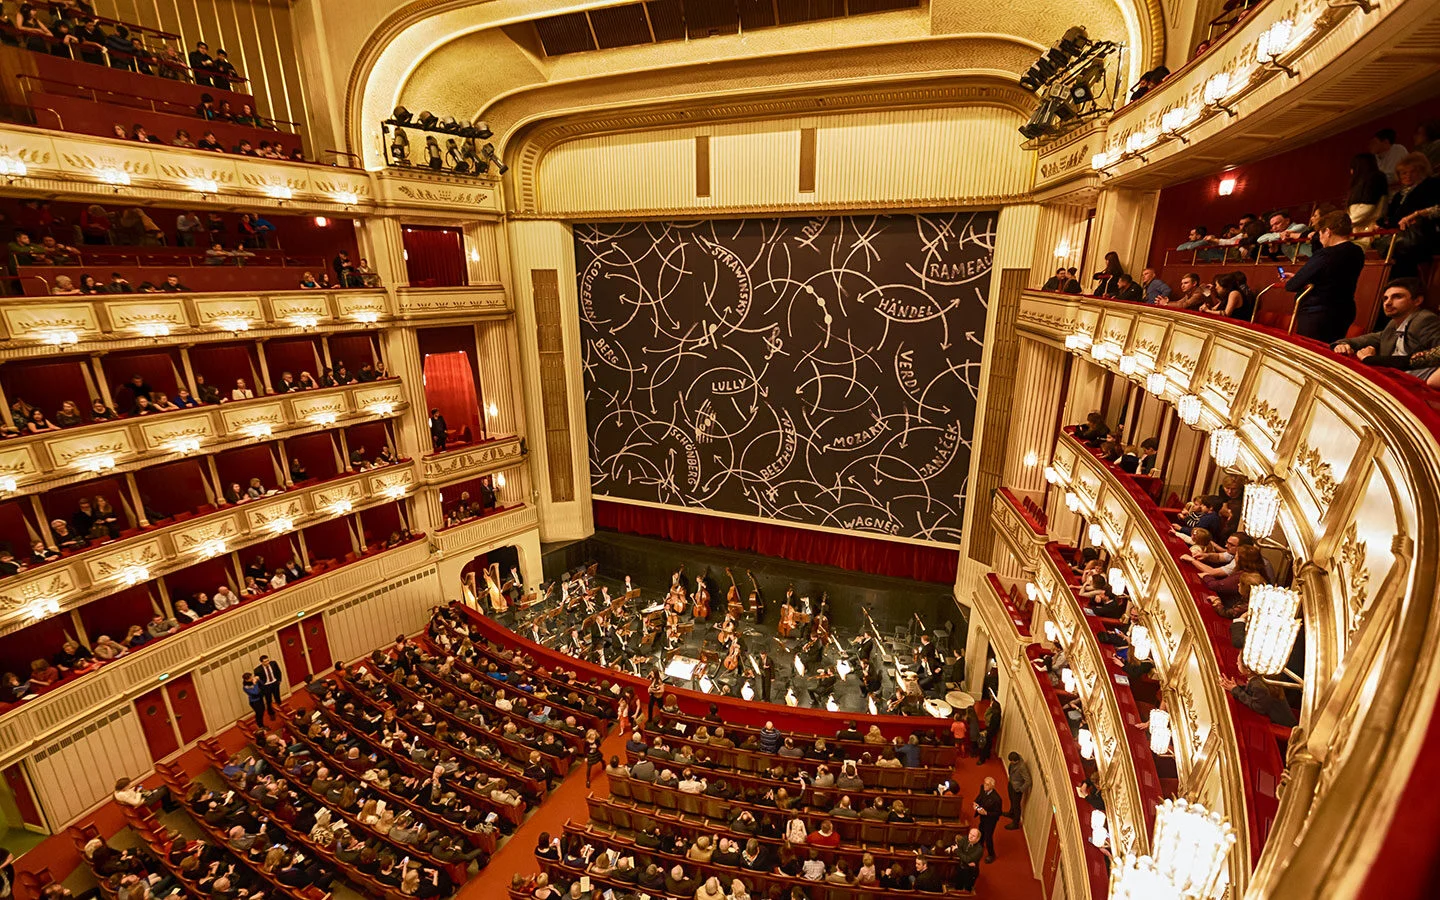 Inside the Staatsoper State Opera House in Vienna